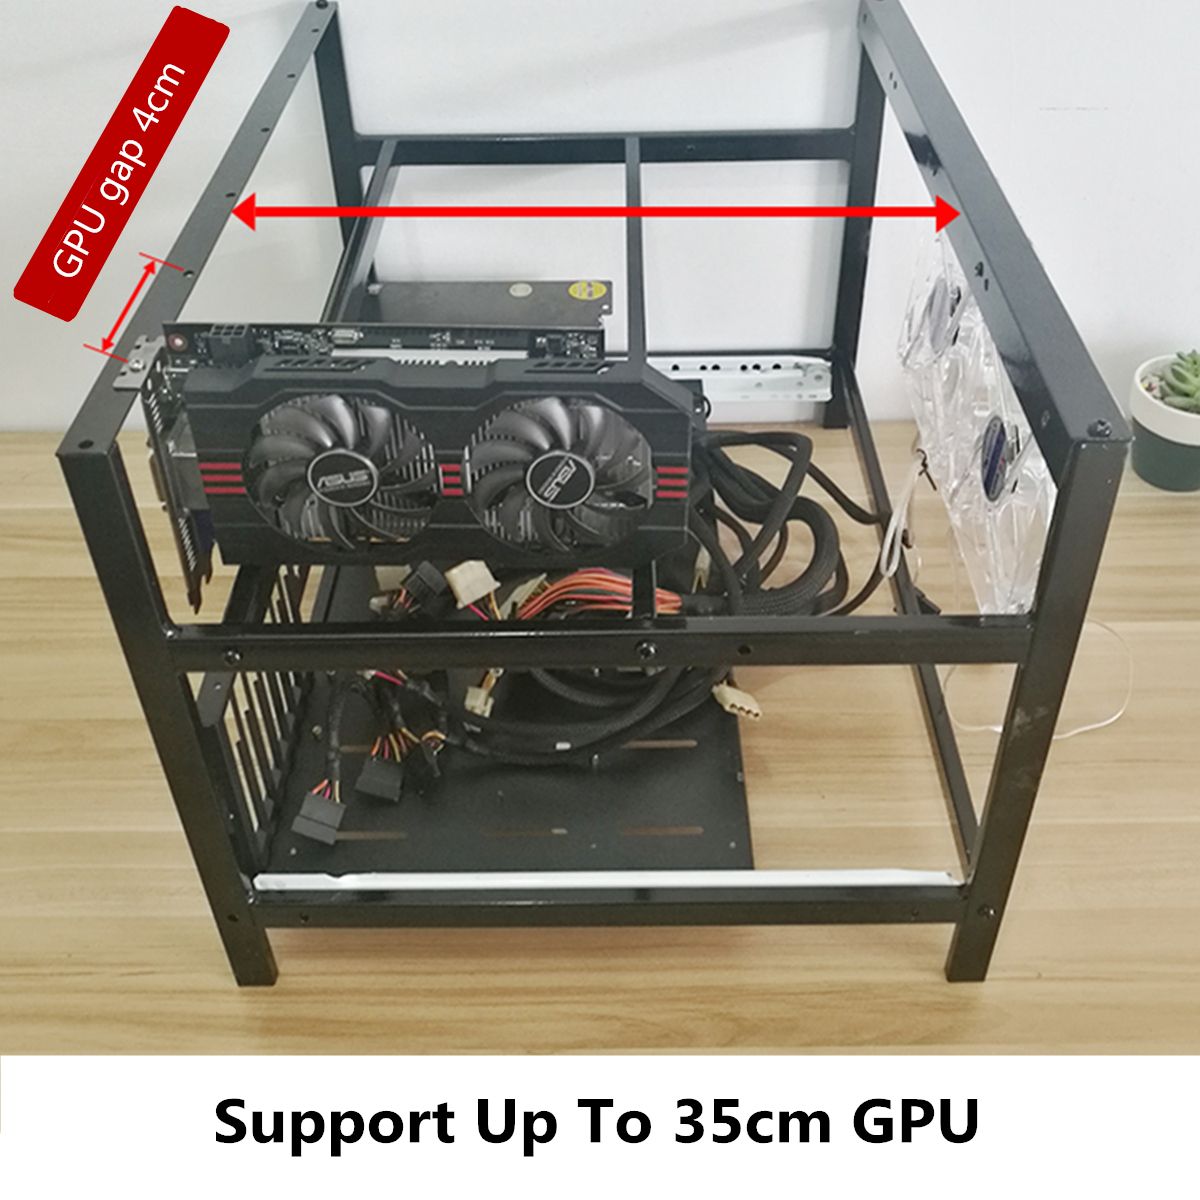 Big-Coin-Open-Air-Mining-Miner-Steal-Frame-Rig-Case-up-to-6-GPU-ETH-BTC-Ethereum-1245595